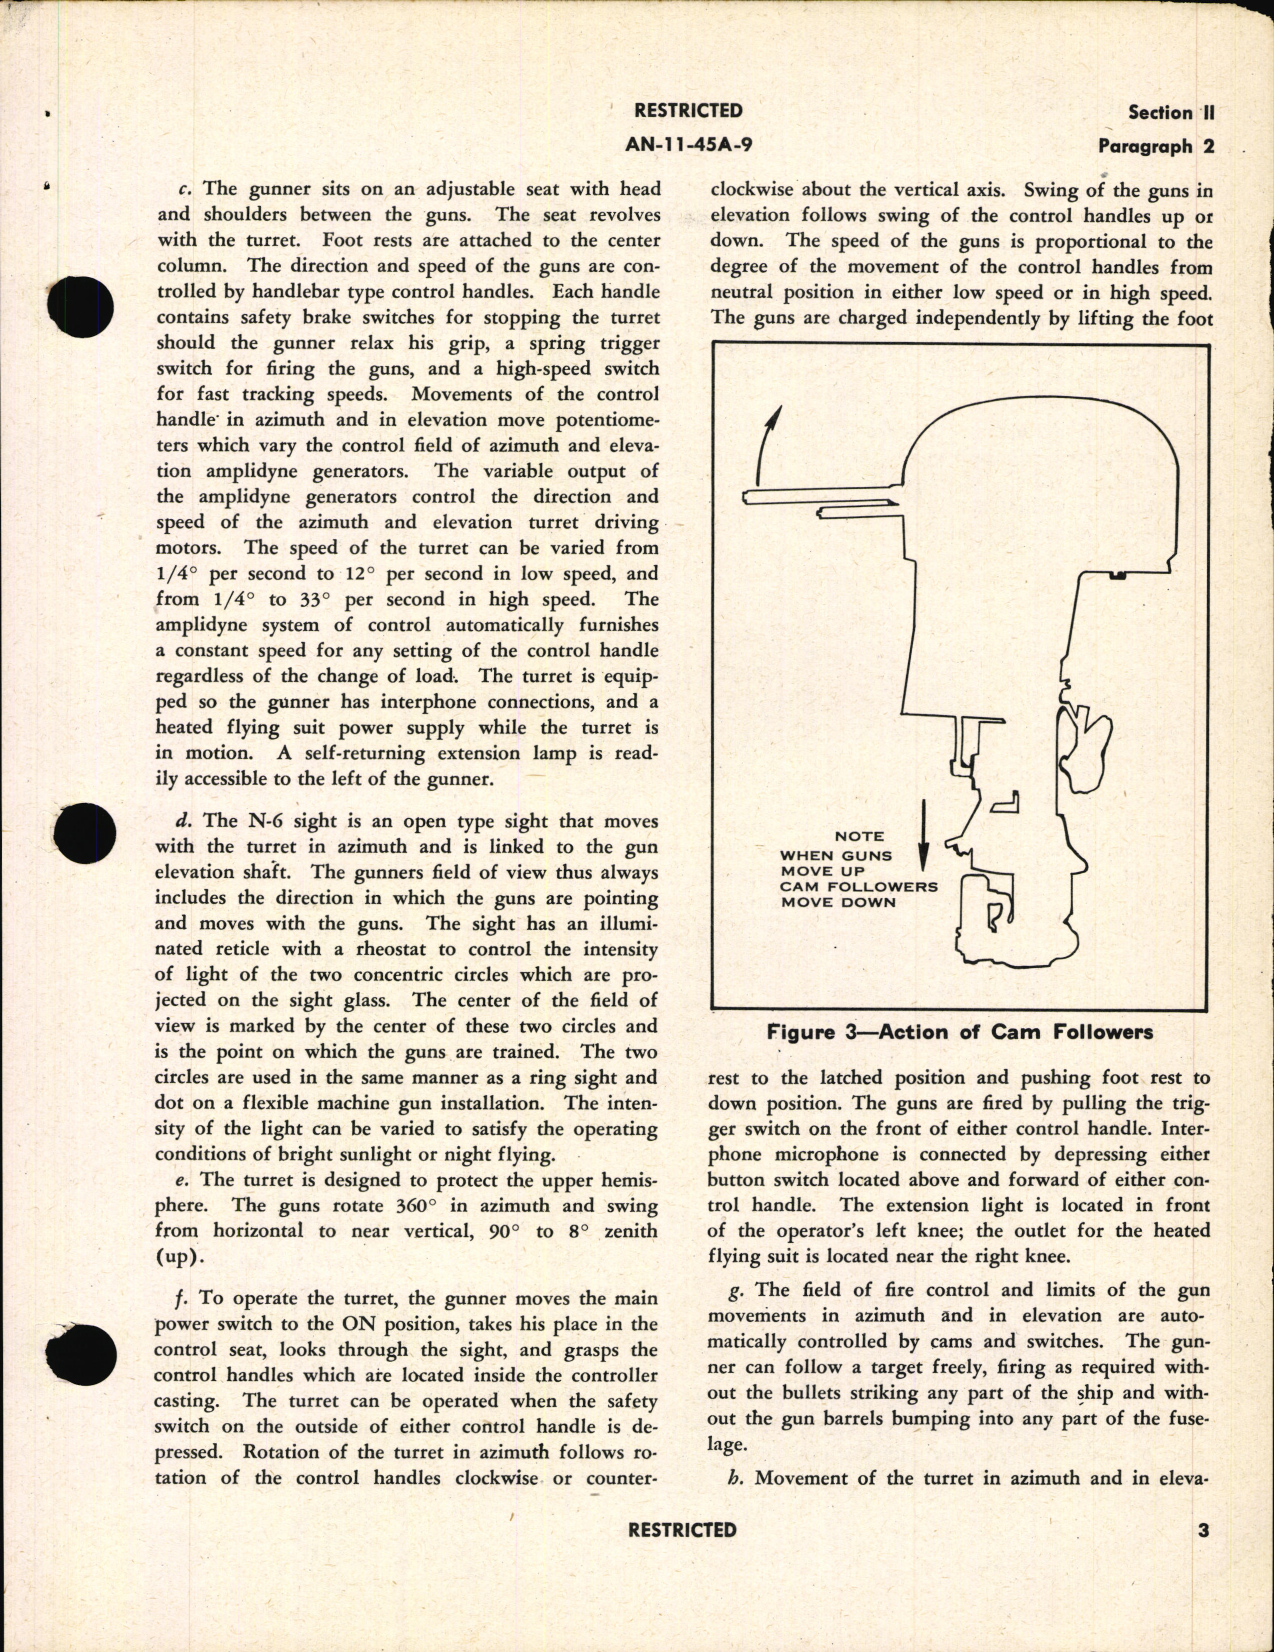 Sample page 7 from AirCorps Library document: Operation and Service Instructions for Upper Gun Turret Type A9B